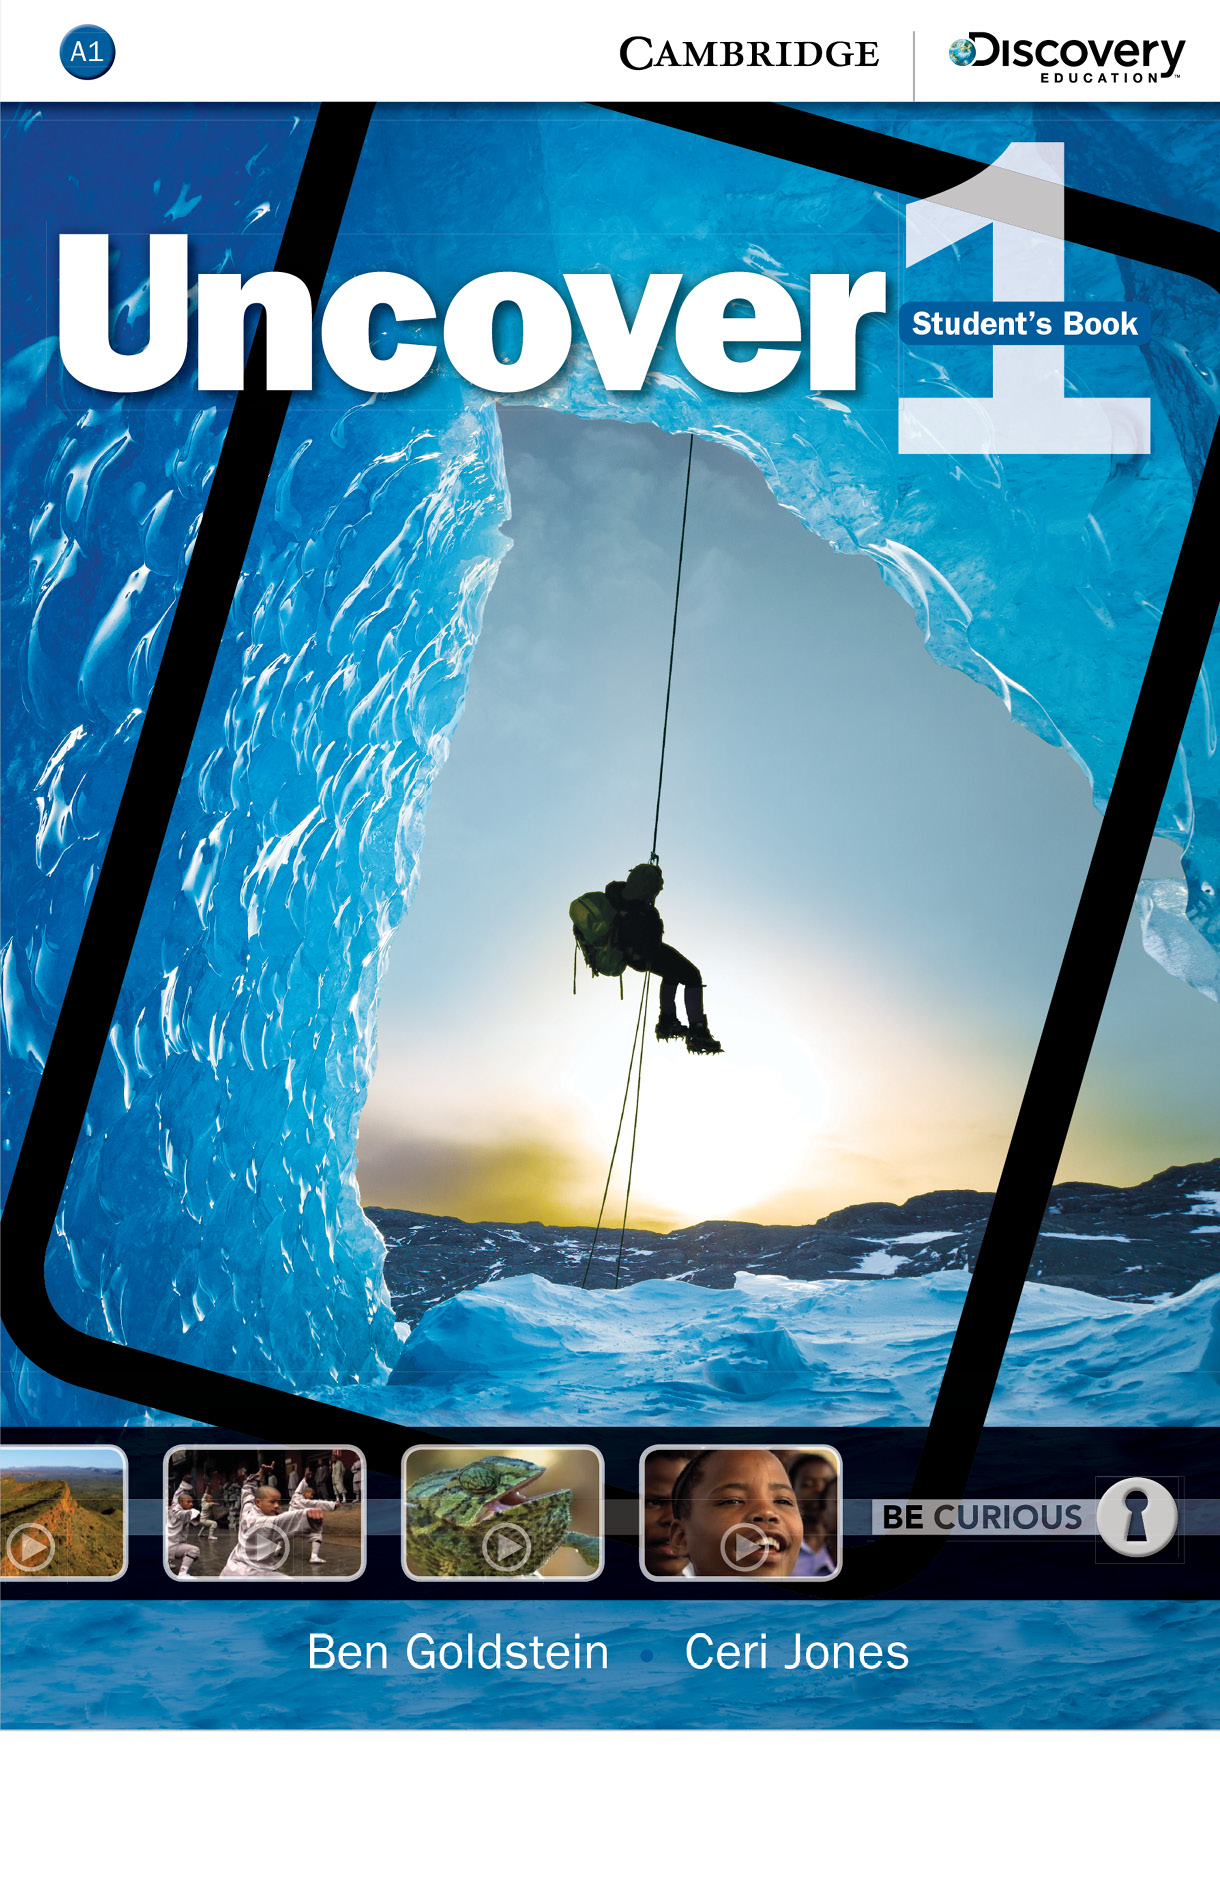 Book cover for Uncover student's book volume 1. It has ice formed with a hole, where a person is hanging from a rope hovering above a body of water.